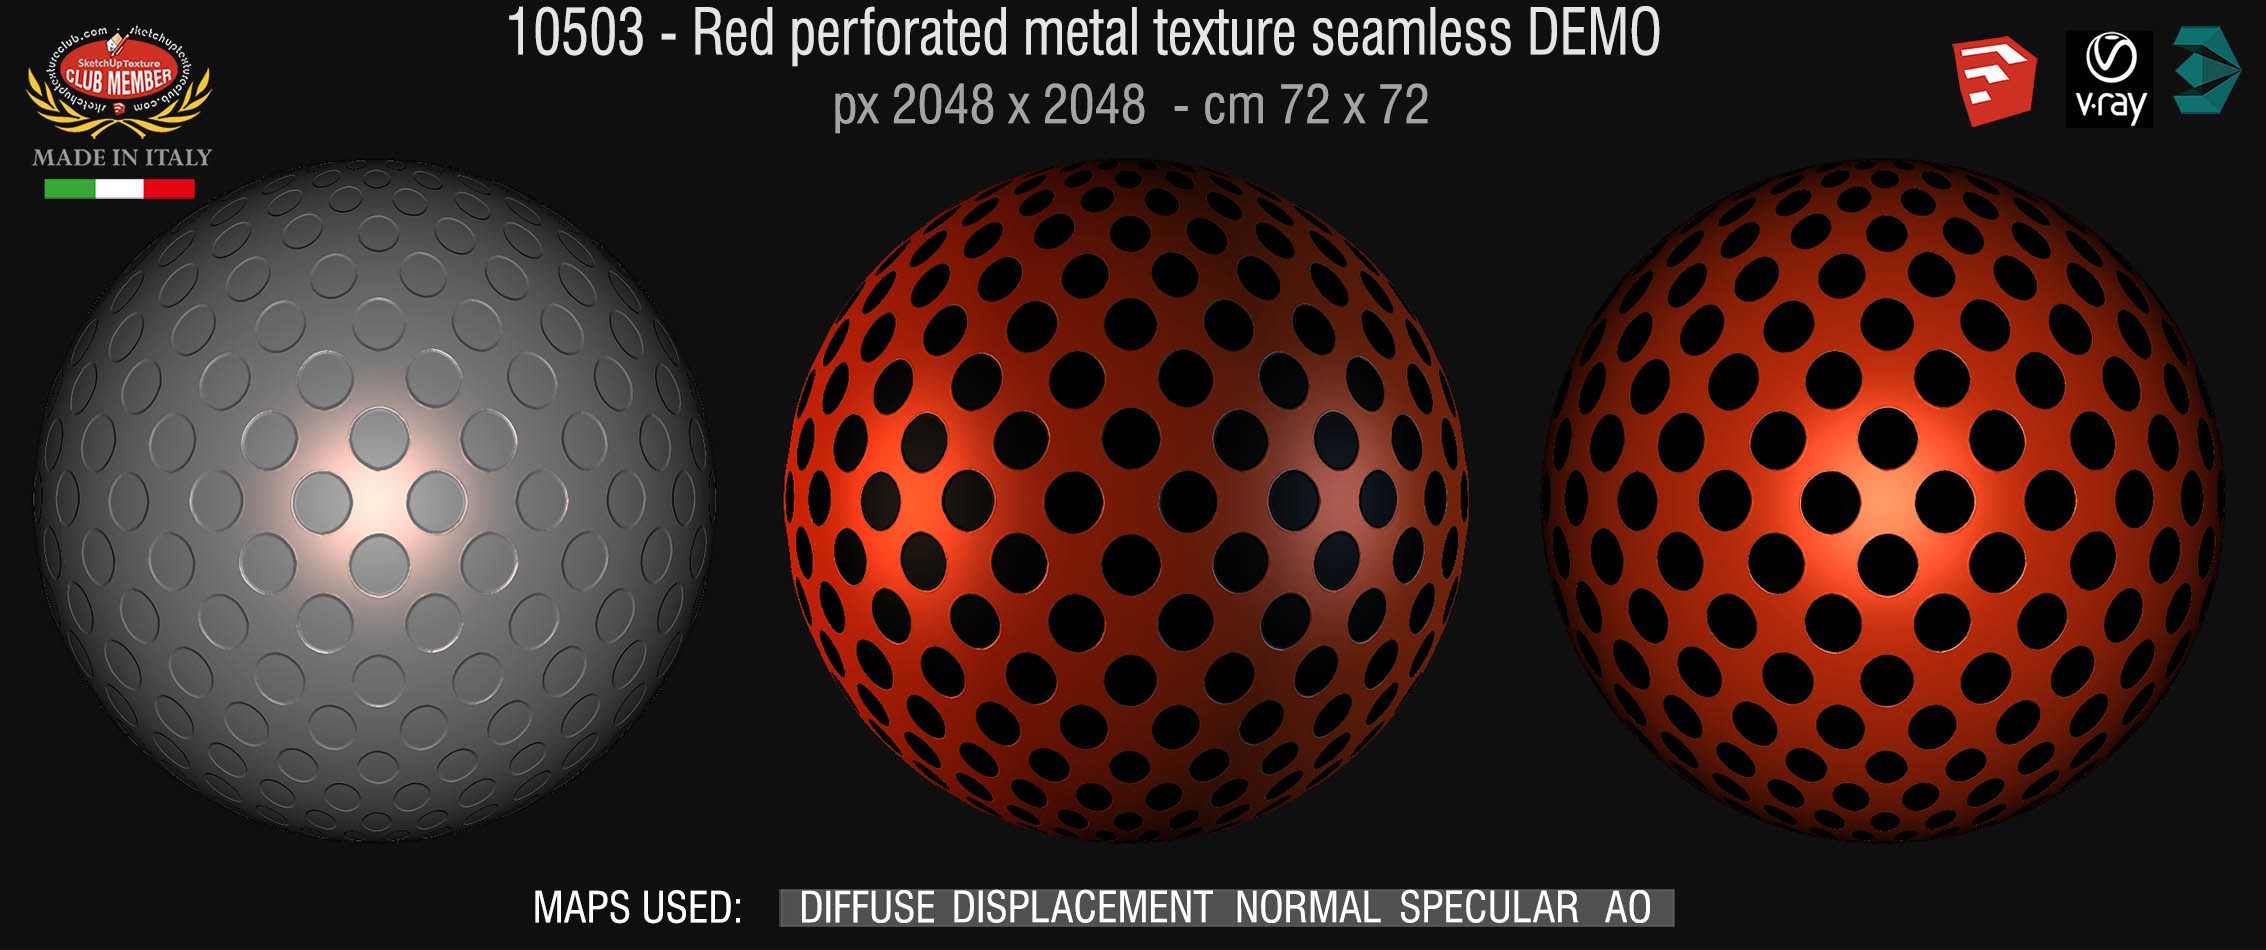 10503 HR Red perforated metal texture seamless + maps DEMO